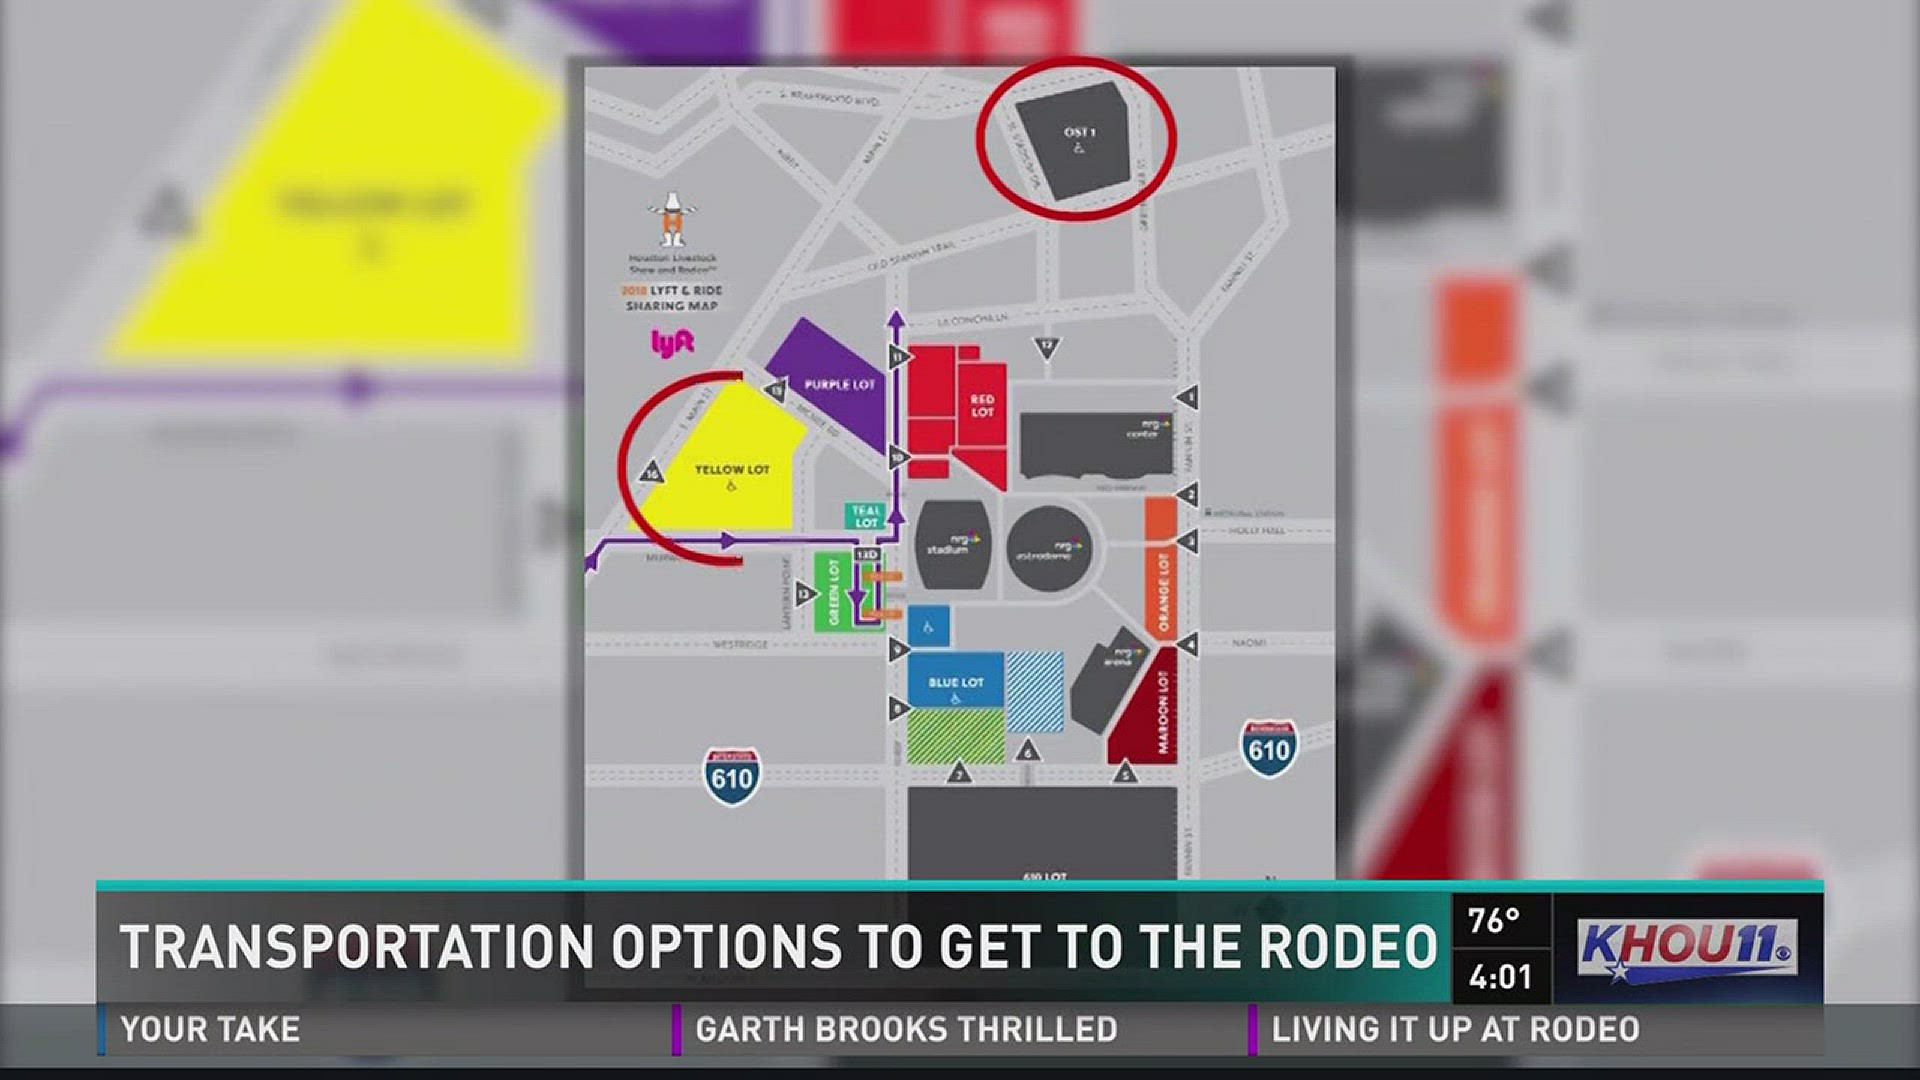 RodeoHouston Parking and transportation guide